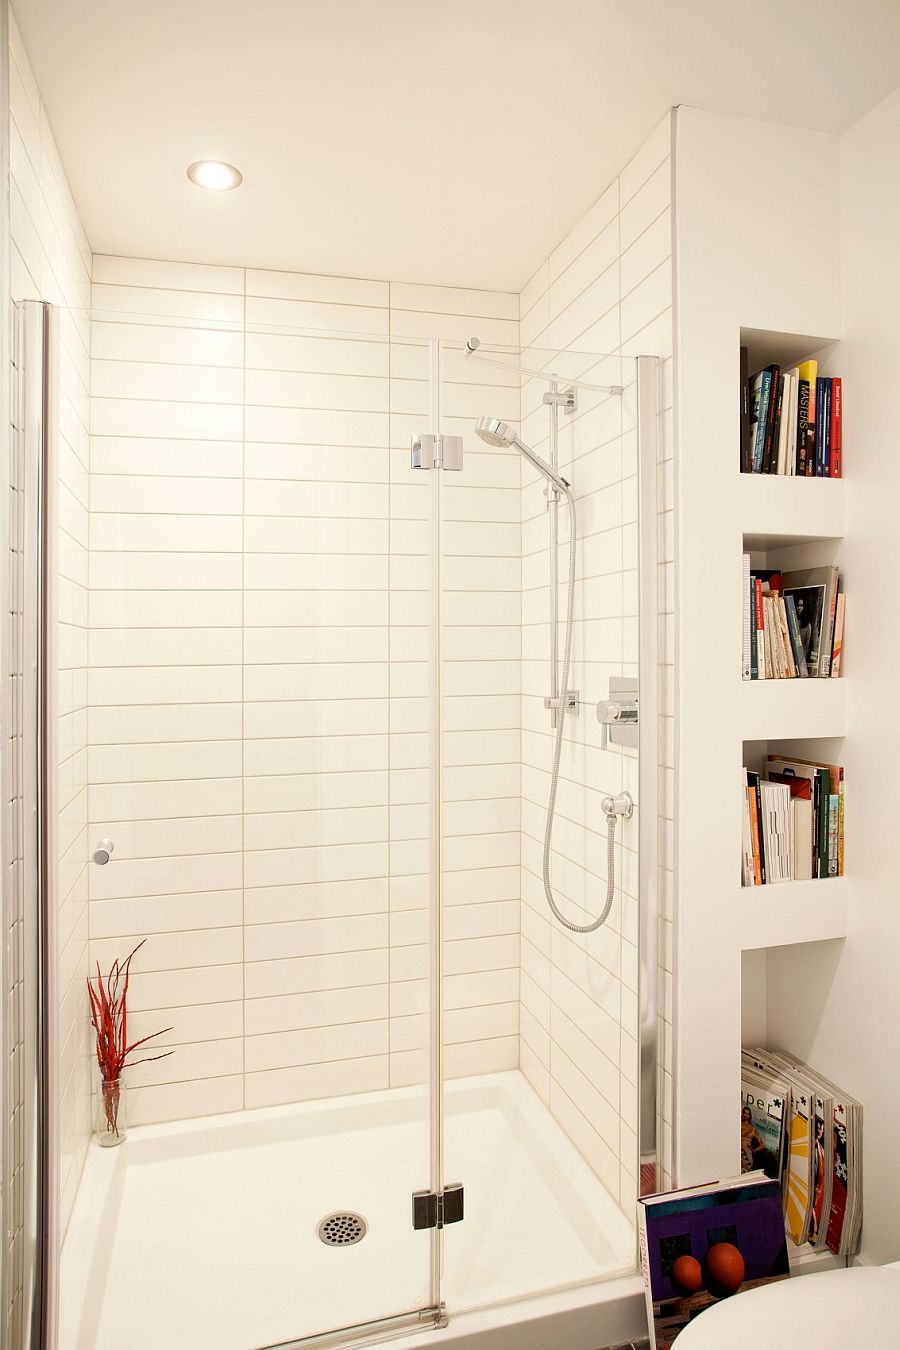 White shower area with small niches next to it that store books and magazines